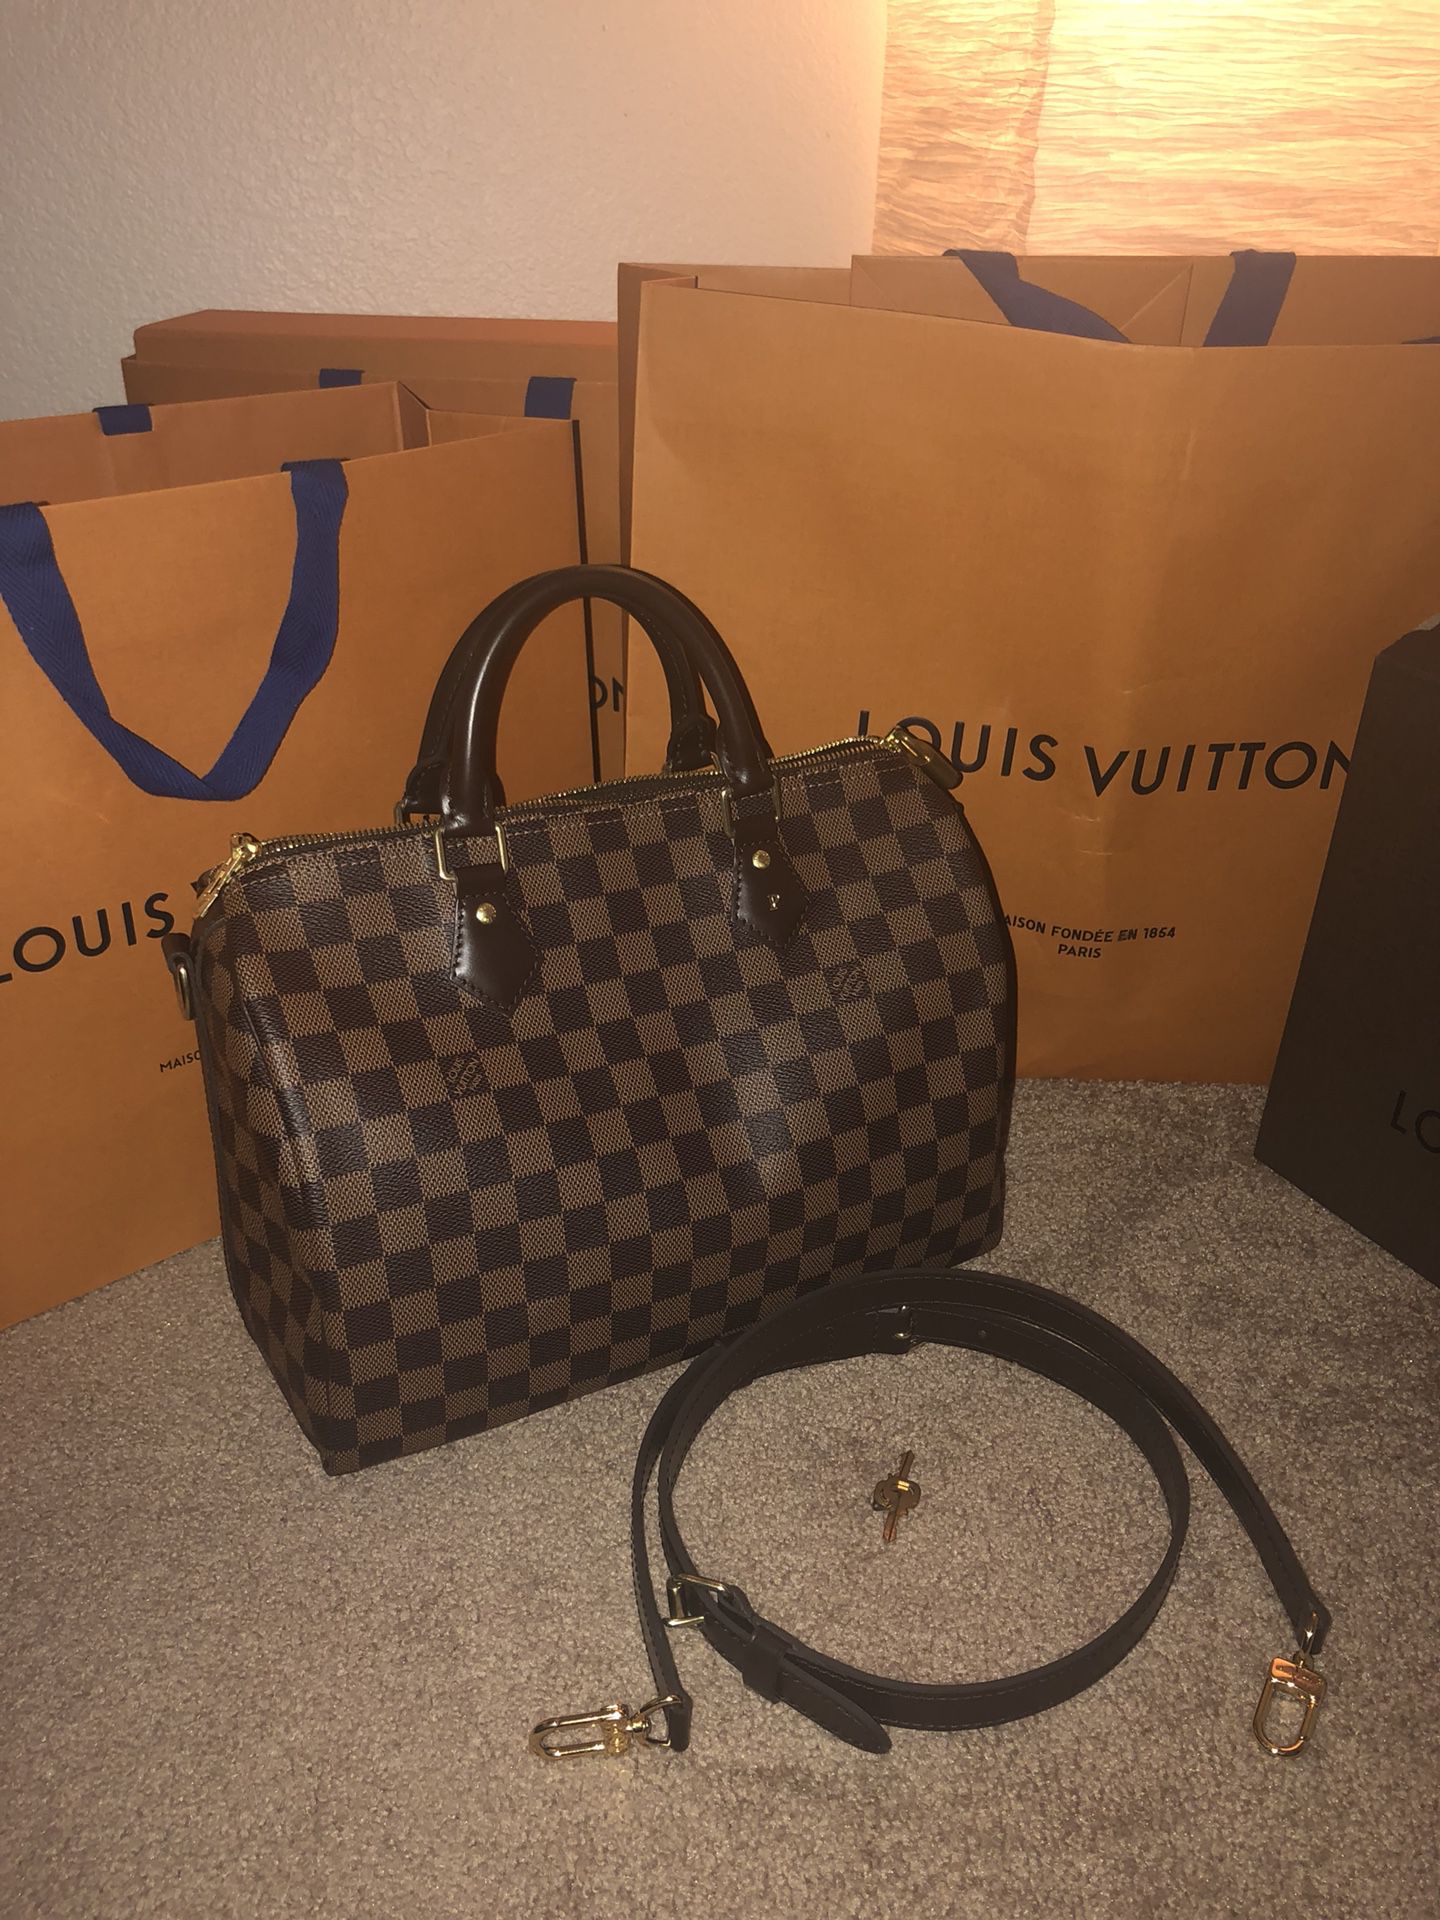 SOLD - LV Damier Speedy 30 Bandouliere (Hot-stamp on strap)_Louis